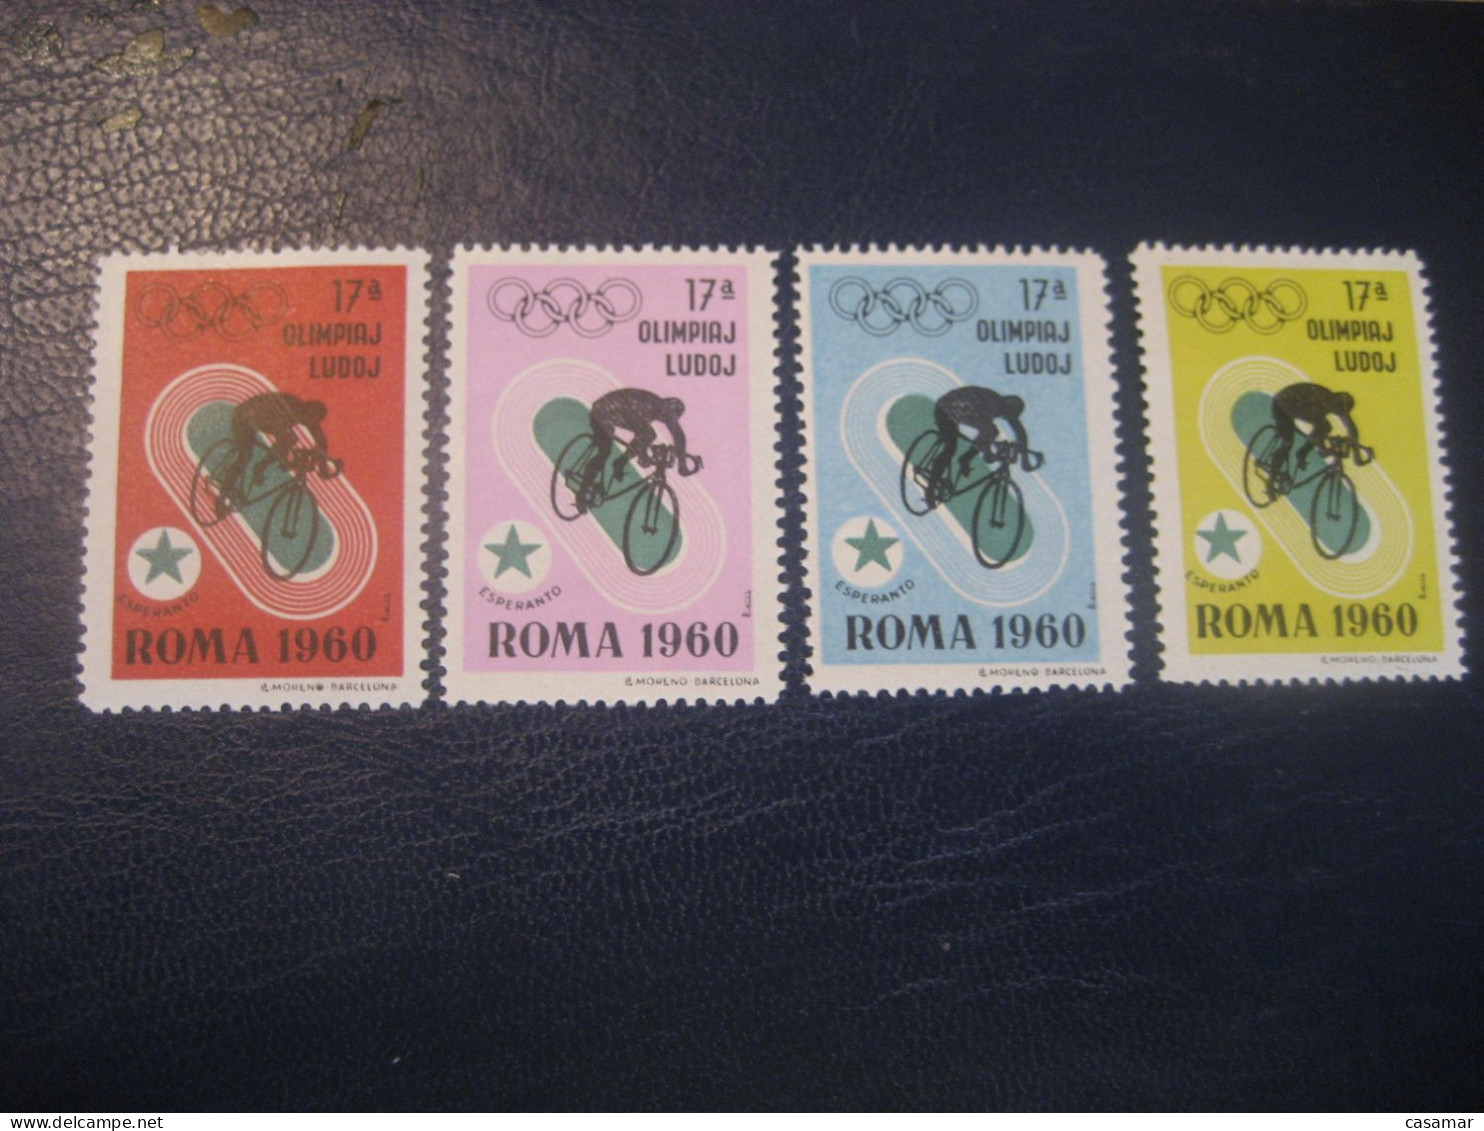 ROMA 1960 Cycling Cyclisme Olympic Games Olympics Esperanto 4 Poster Stamp Vignette ITALY Spain Label - Radsport